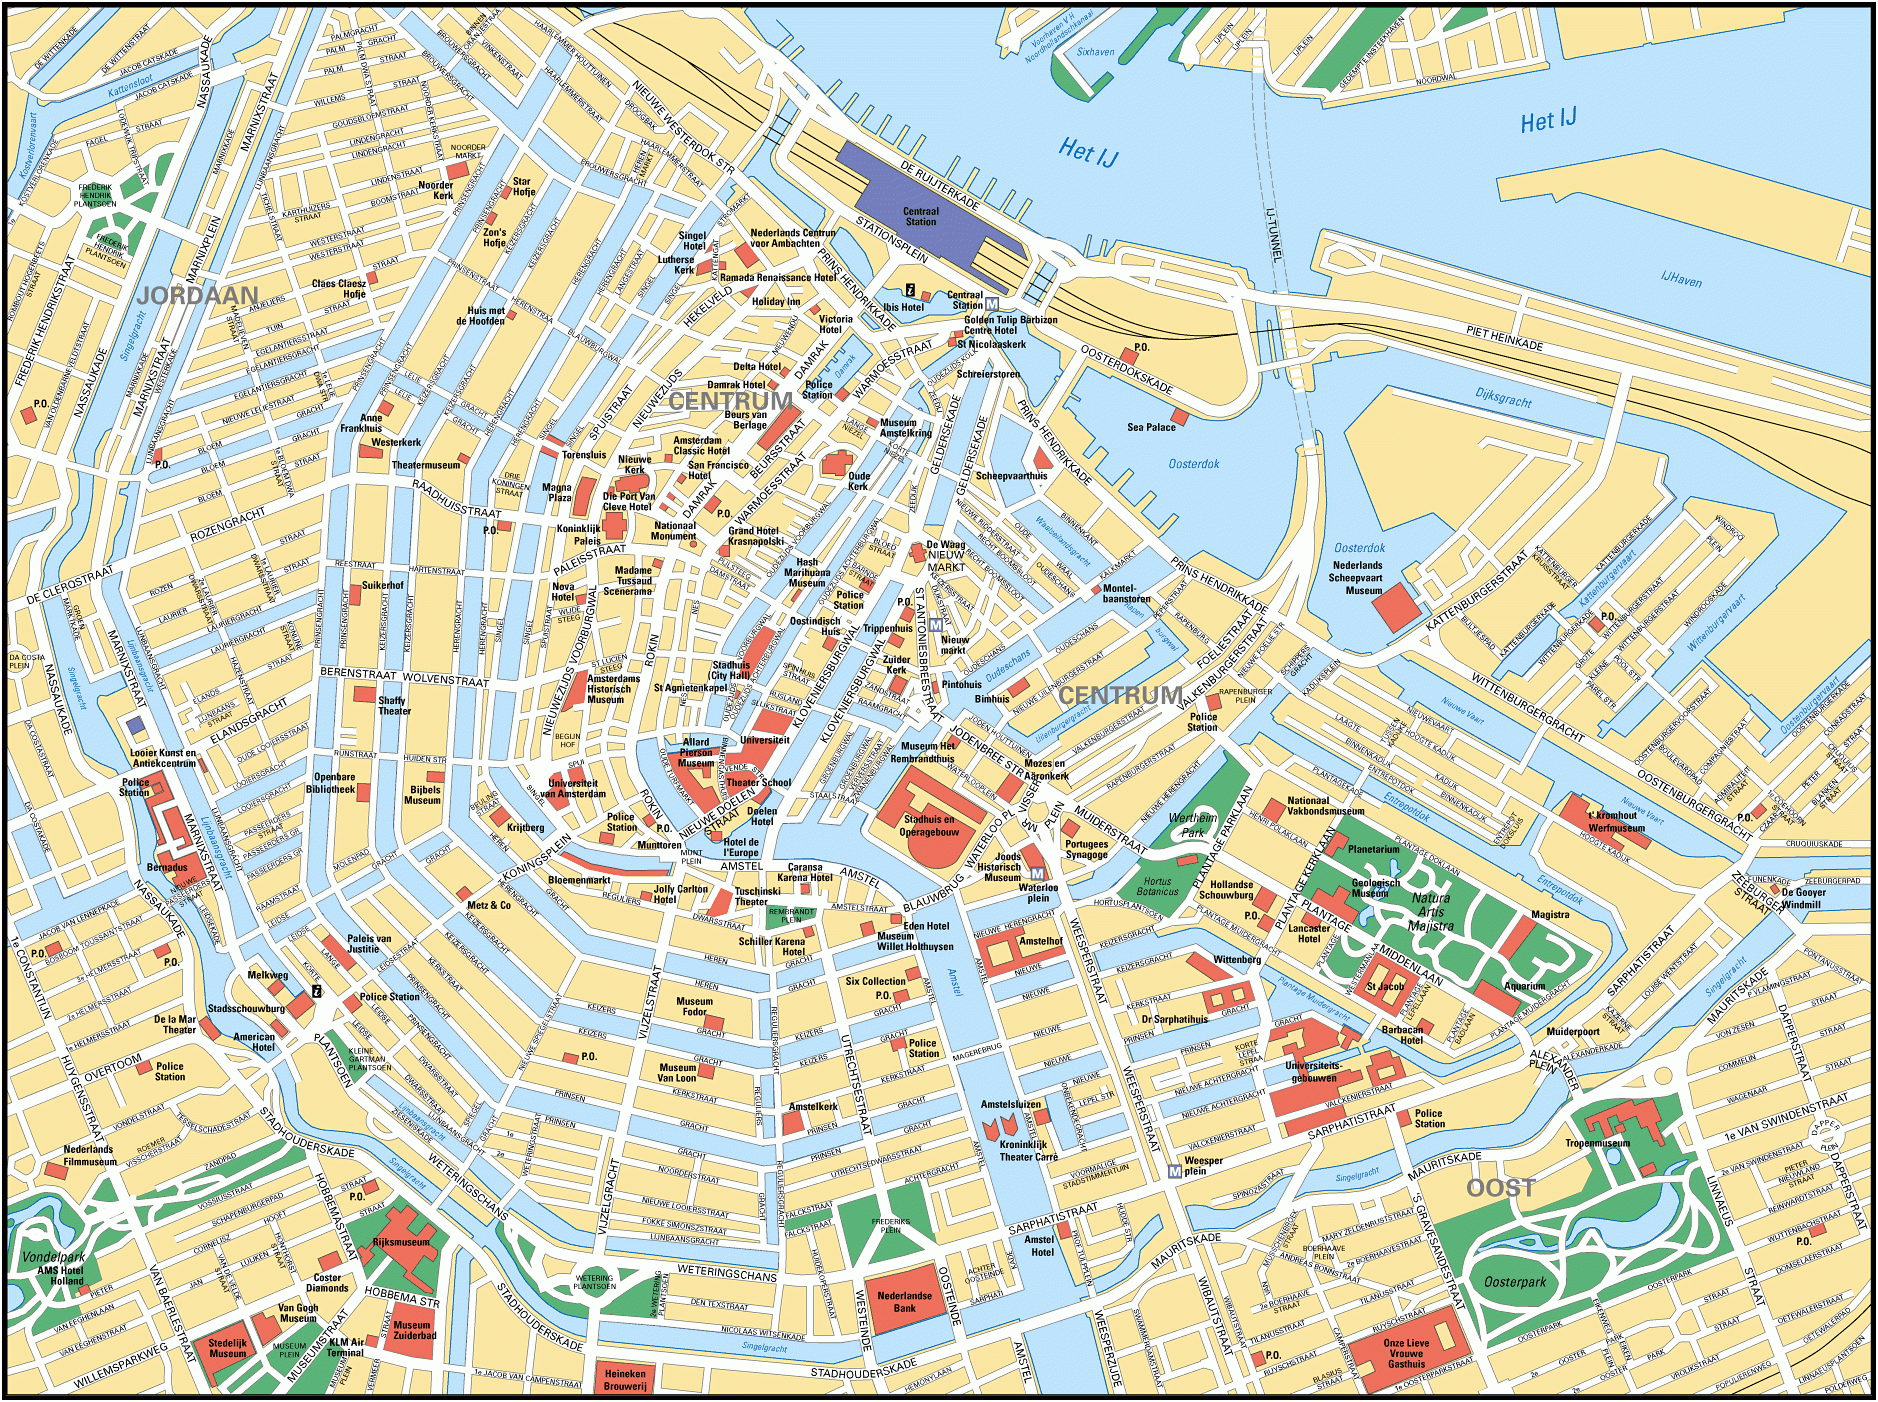 City Map Of Amsterdam Netherlands Map Of Amsterdam City 